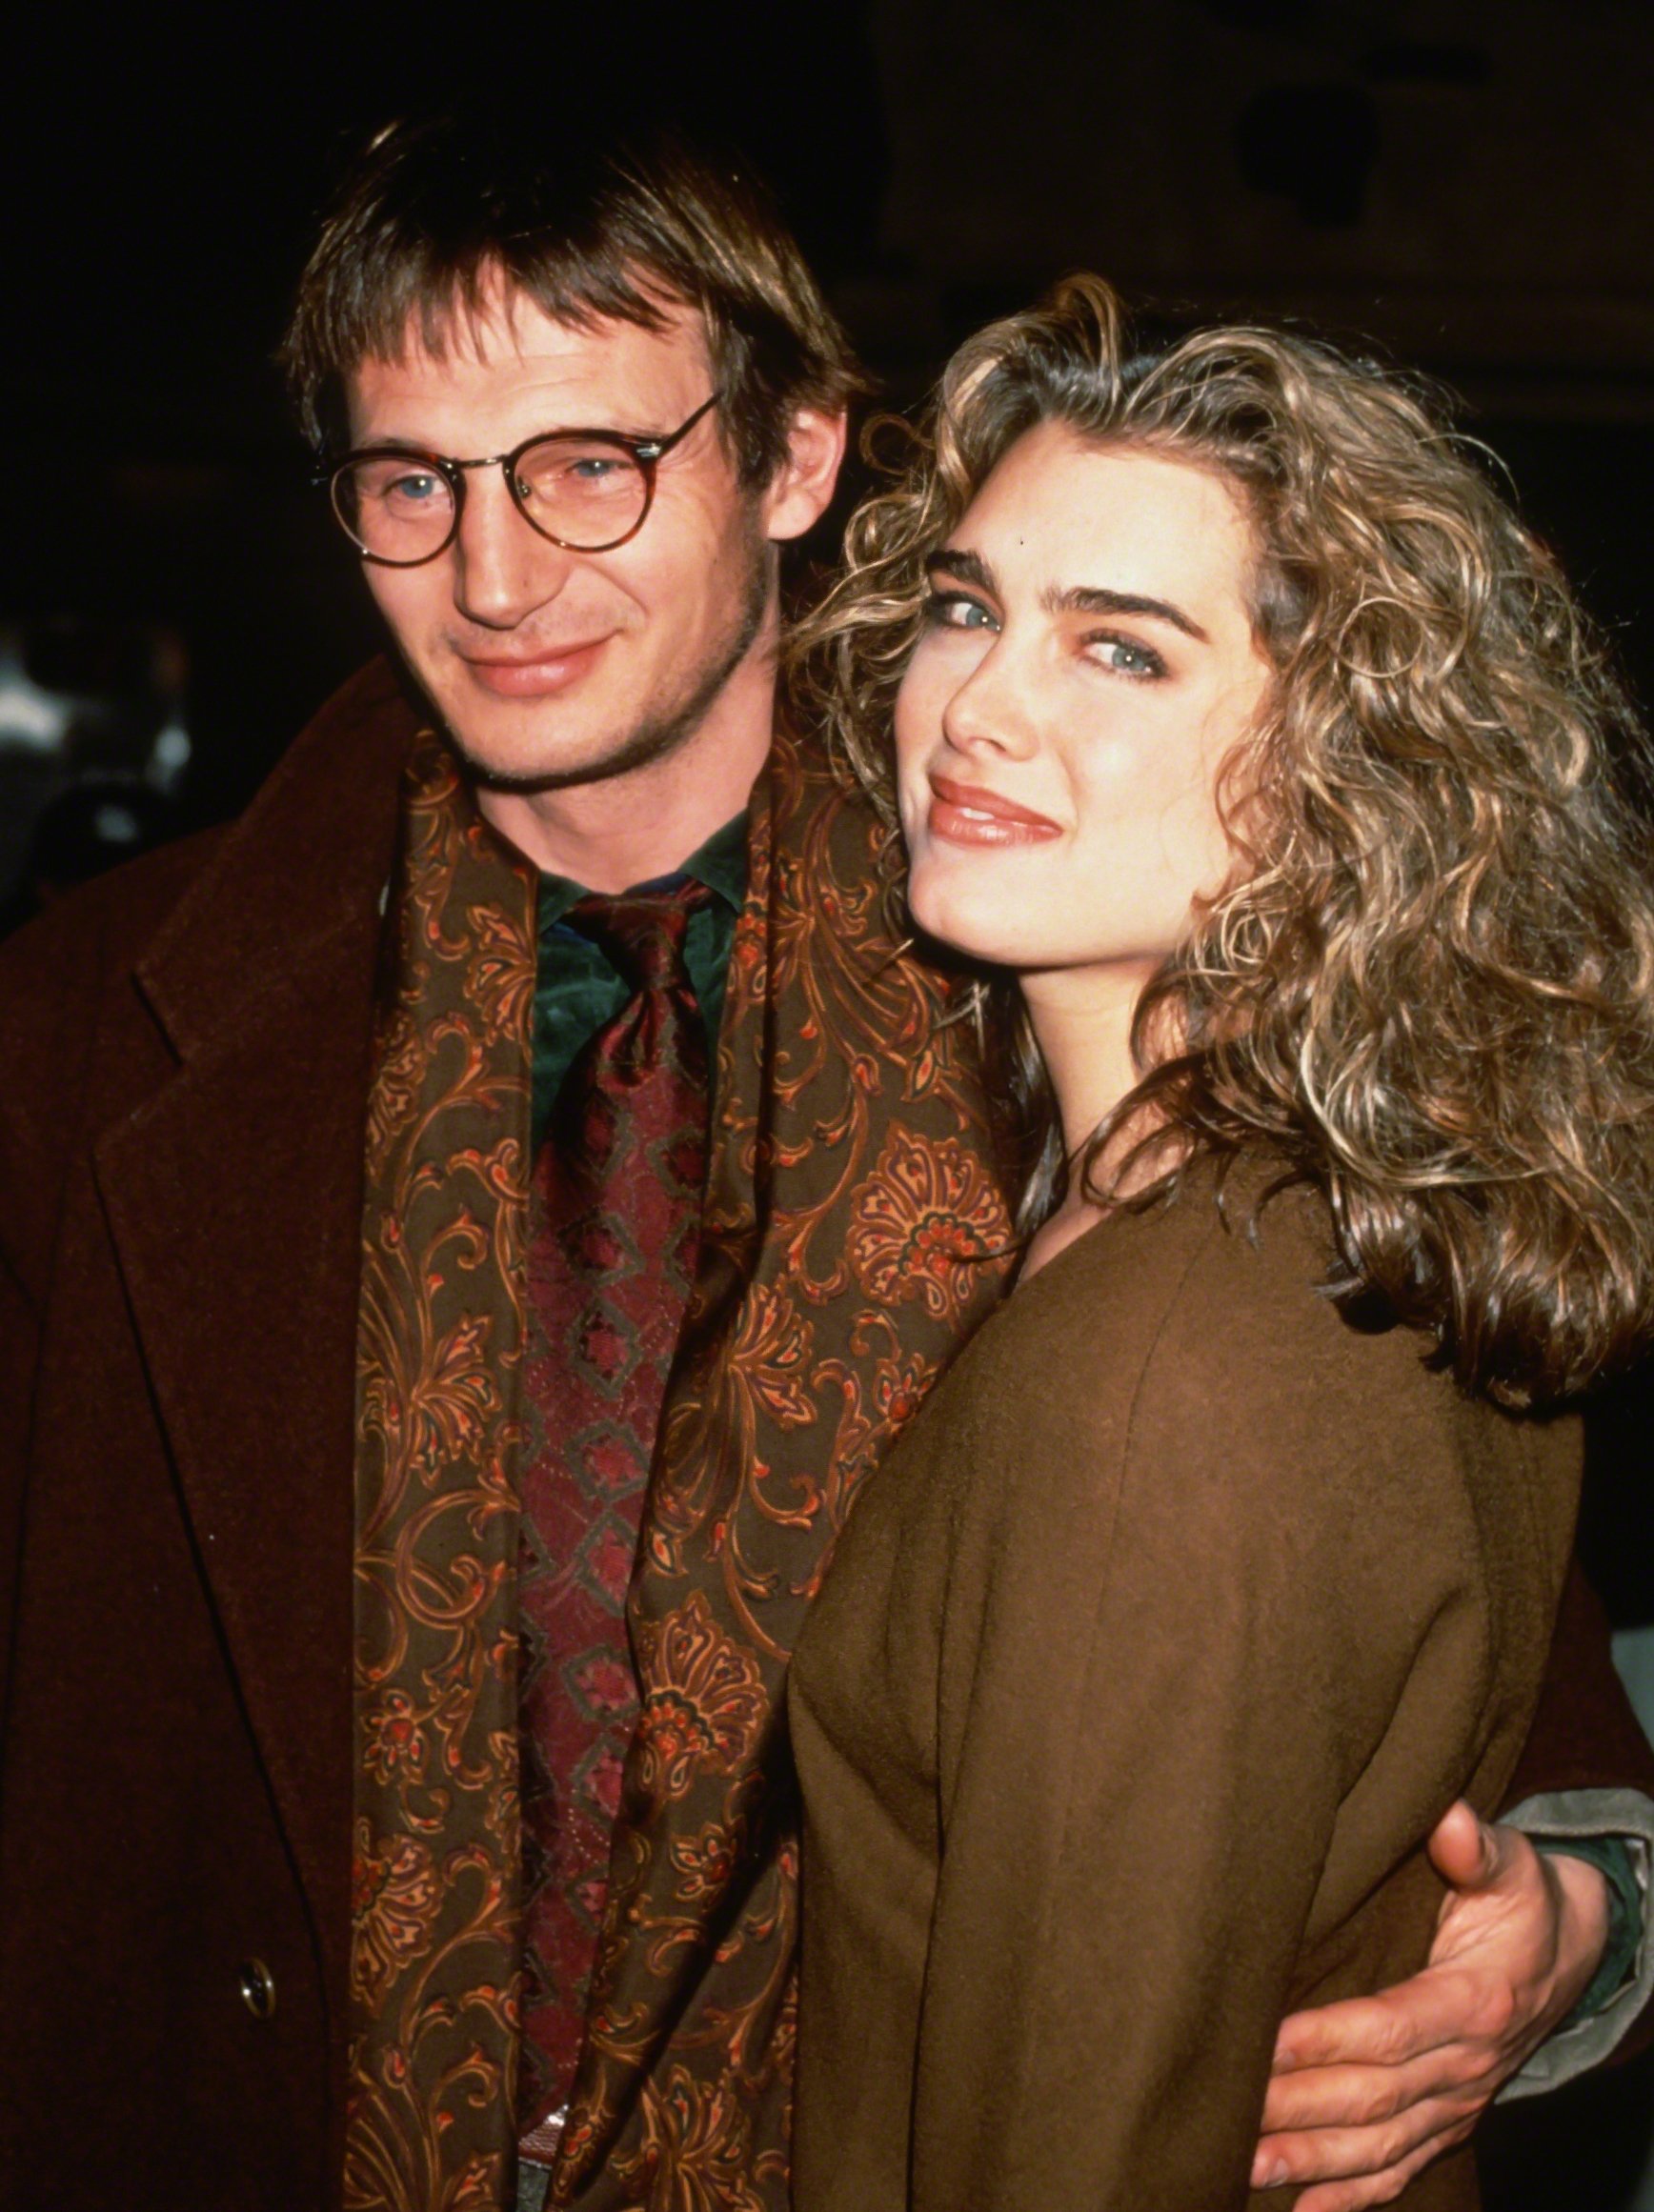  Liam Neeson and Brooke Shields attends the Premiere of "Under Suspicion" at the Loews Fine Arts Theater on February 24, 1992 in New York City | Source: Getty Images